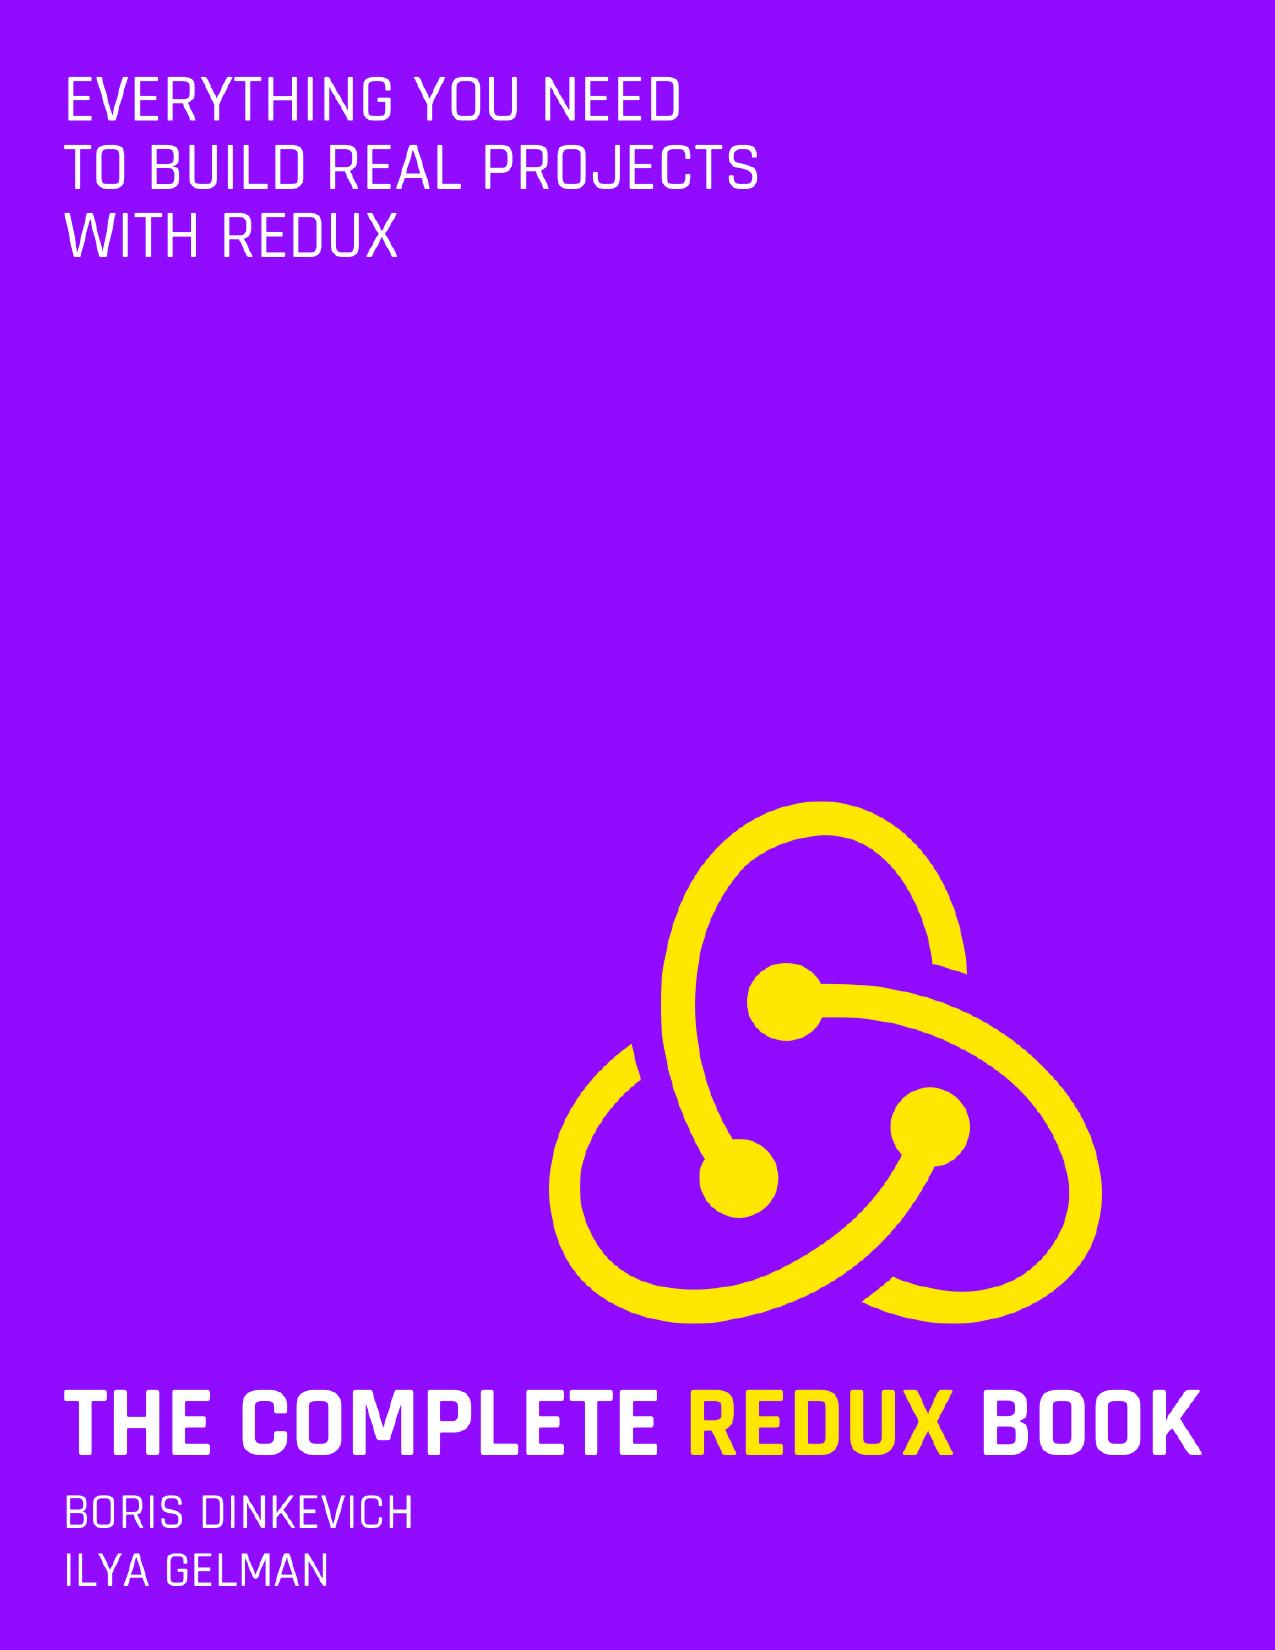 The Complete Redux Book: Everything You Need to Build Real Projects With Redux